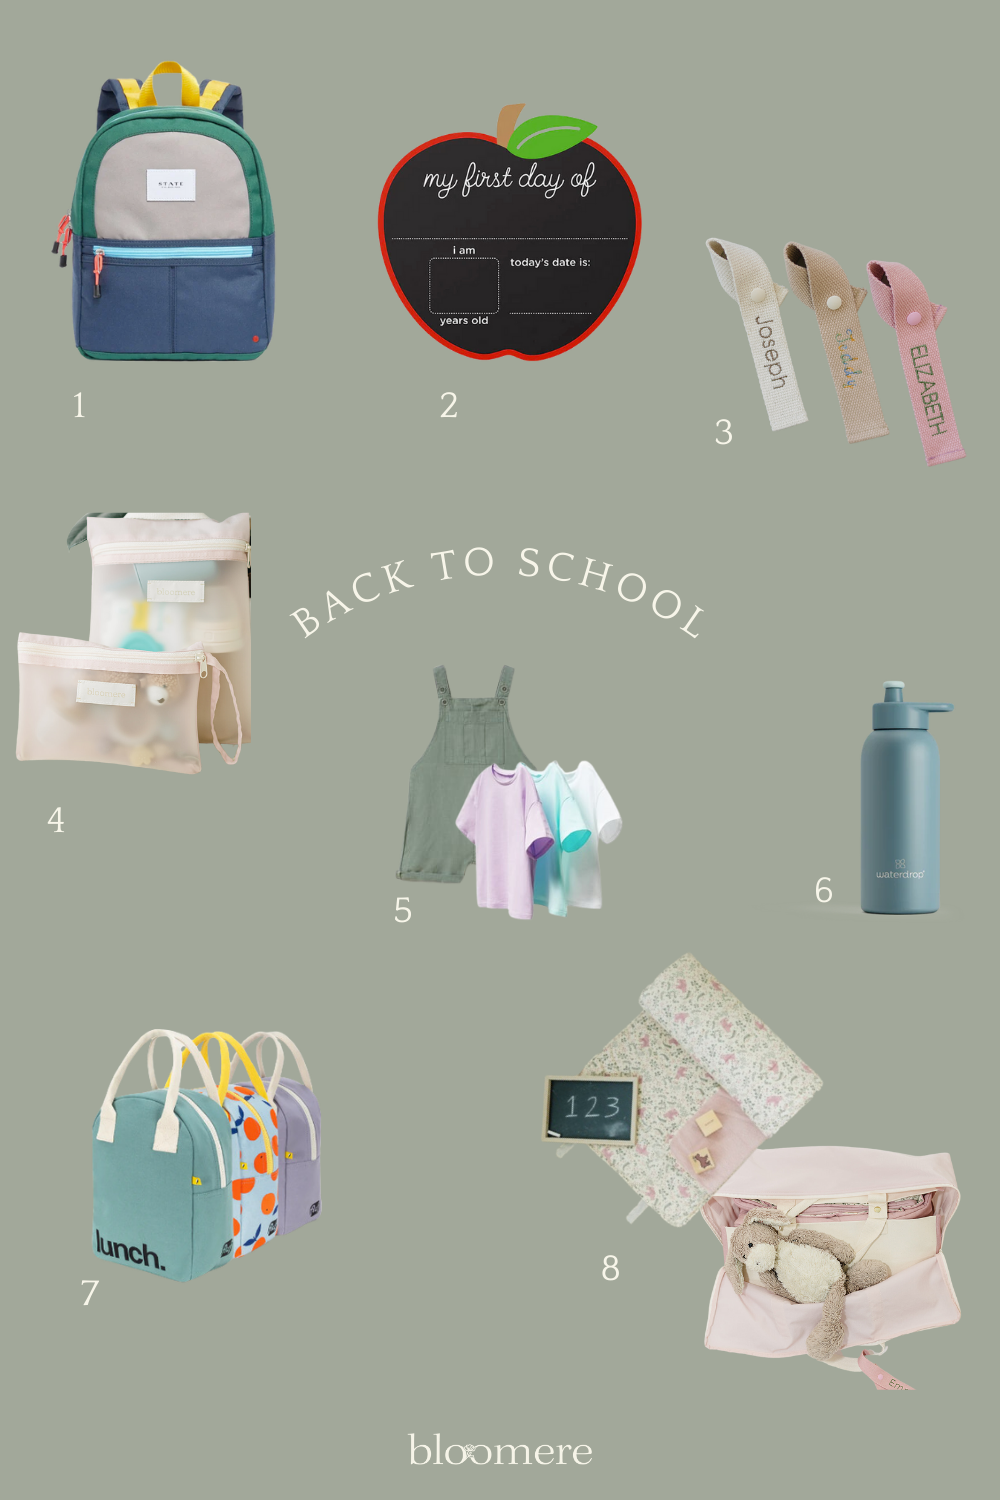 https://cdn.shopify.com/s/files/1/0474/4190/3775/t/6/assets/blog-post-what-to-bring-back-to-school-1-1687275487698.png?v=1687275488